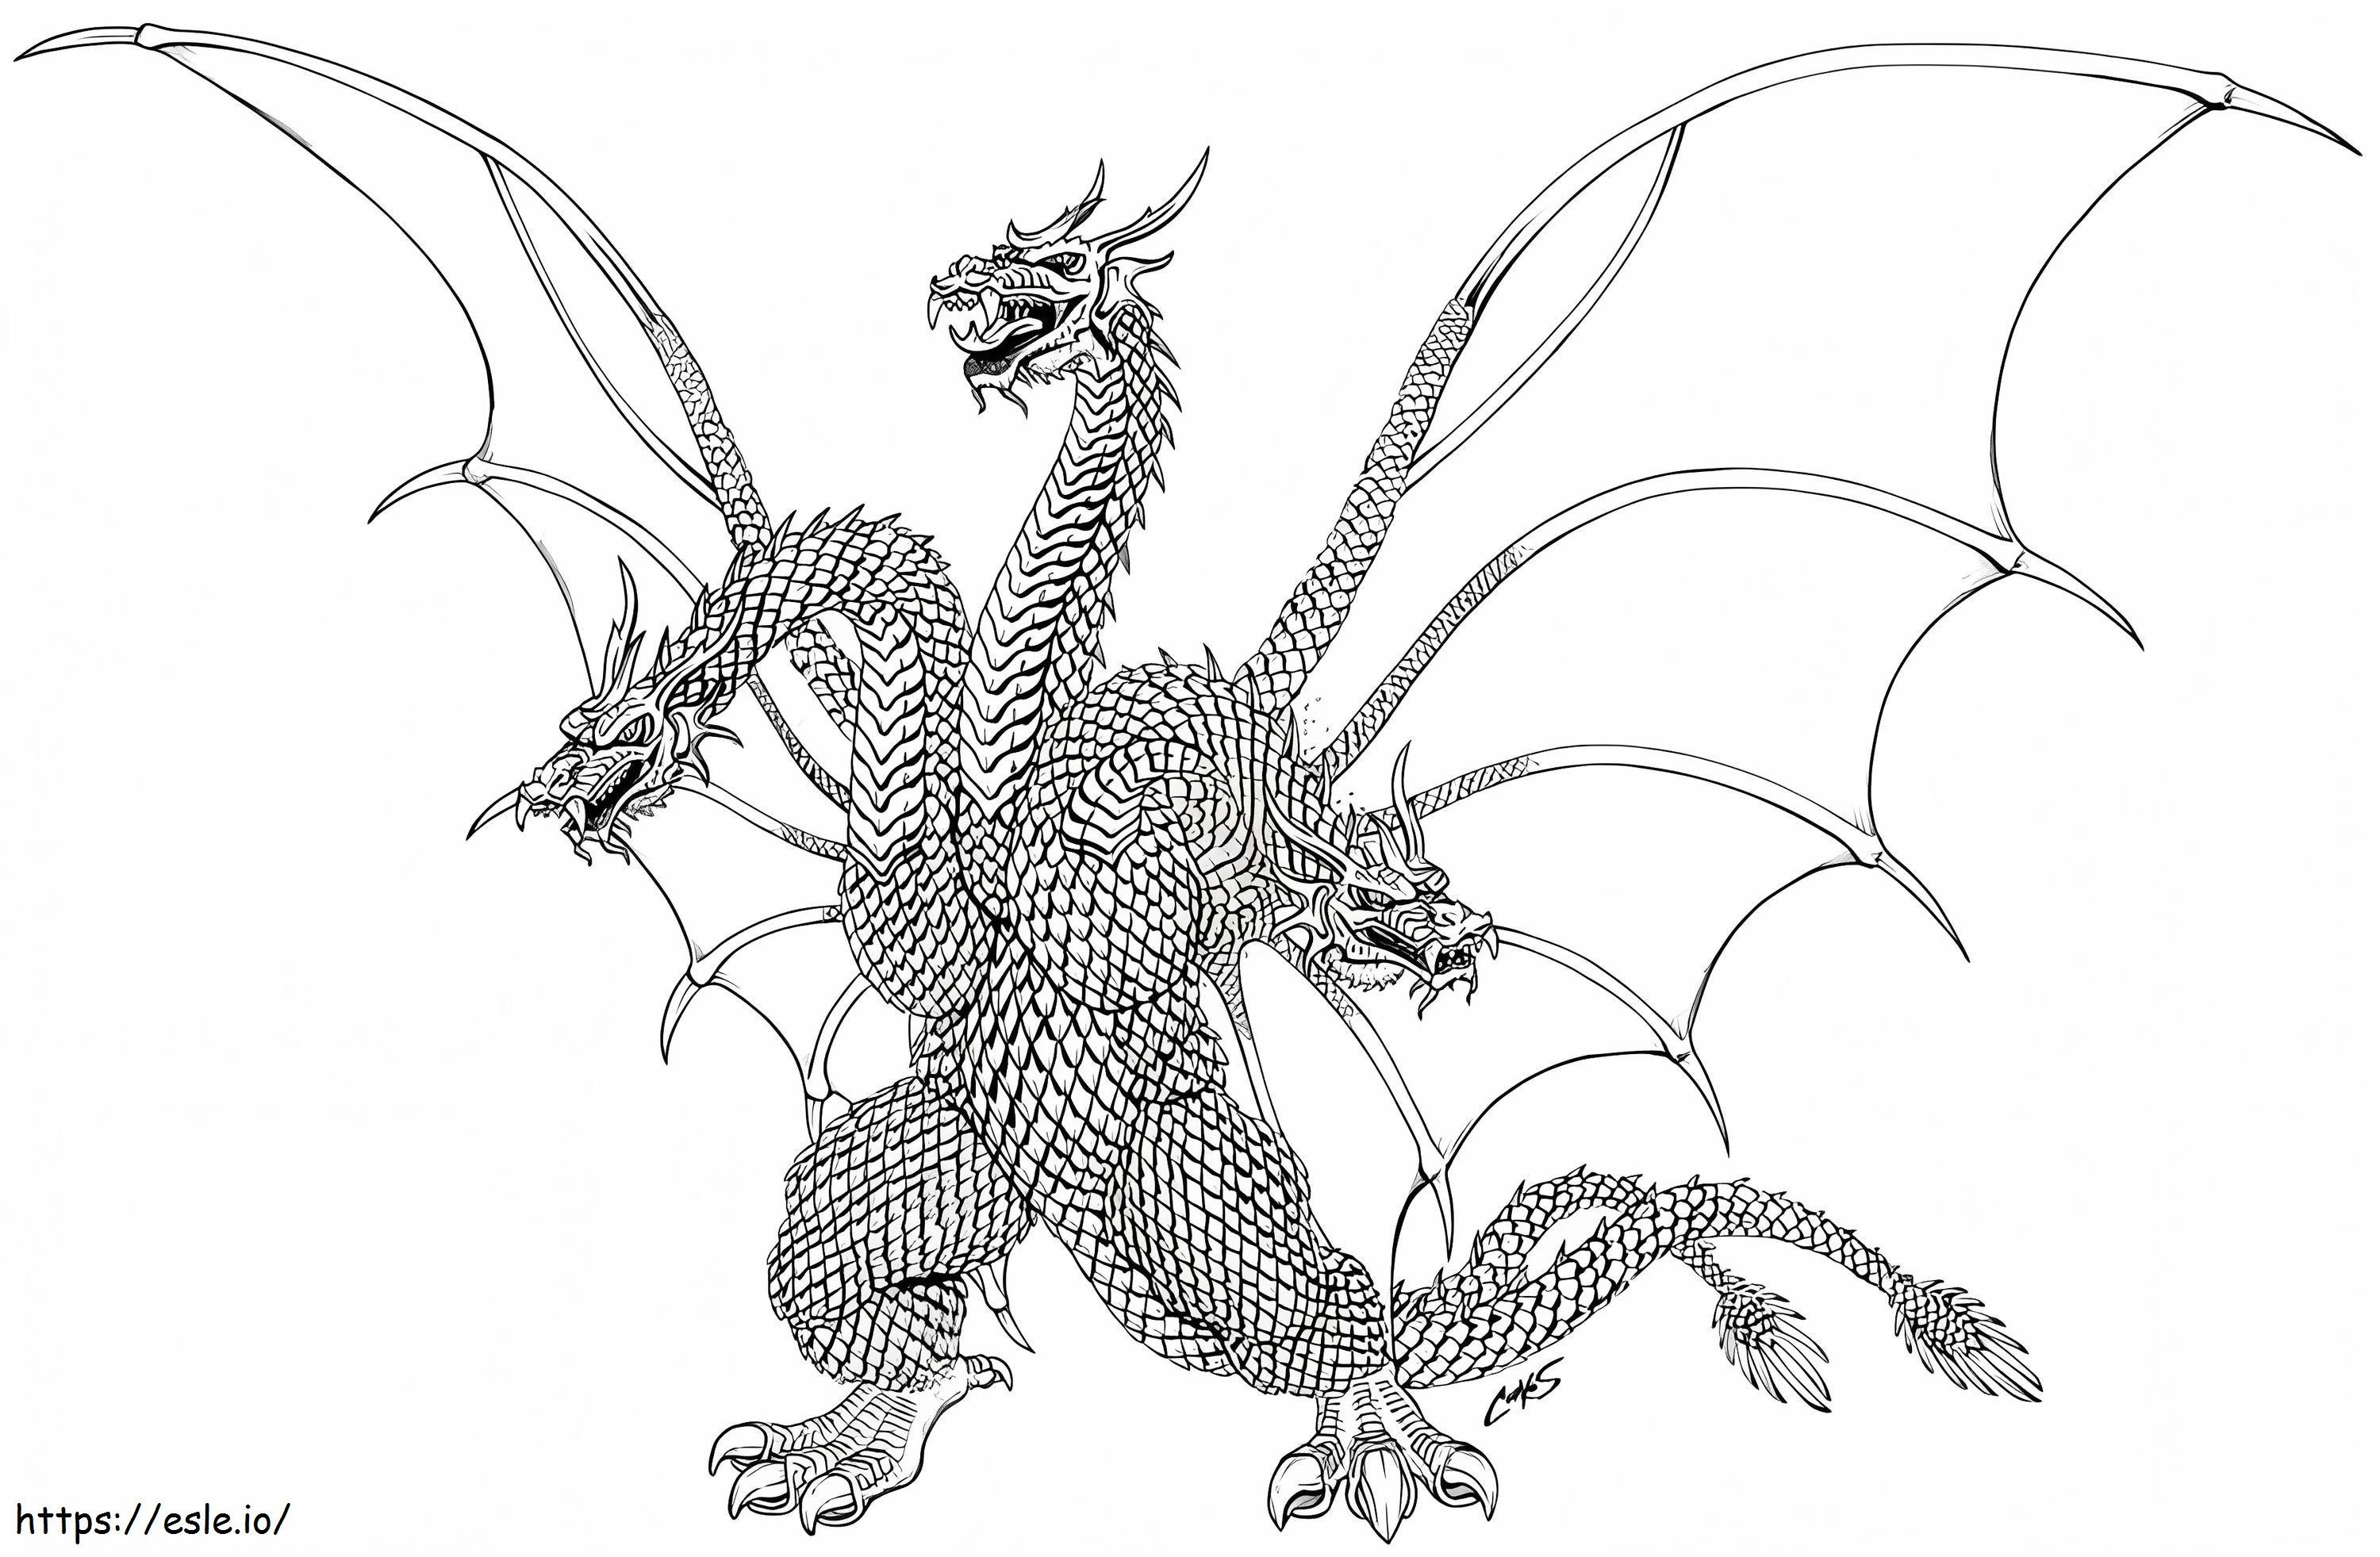 Adult Ghidorah coloring page